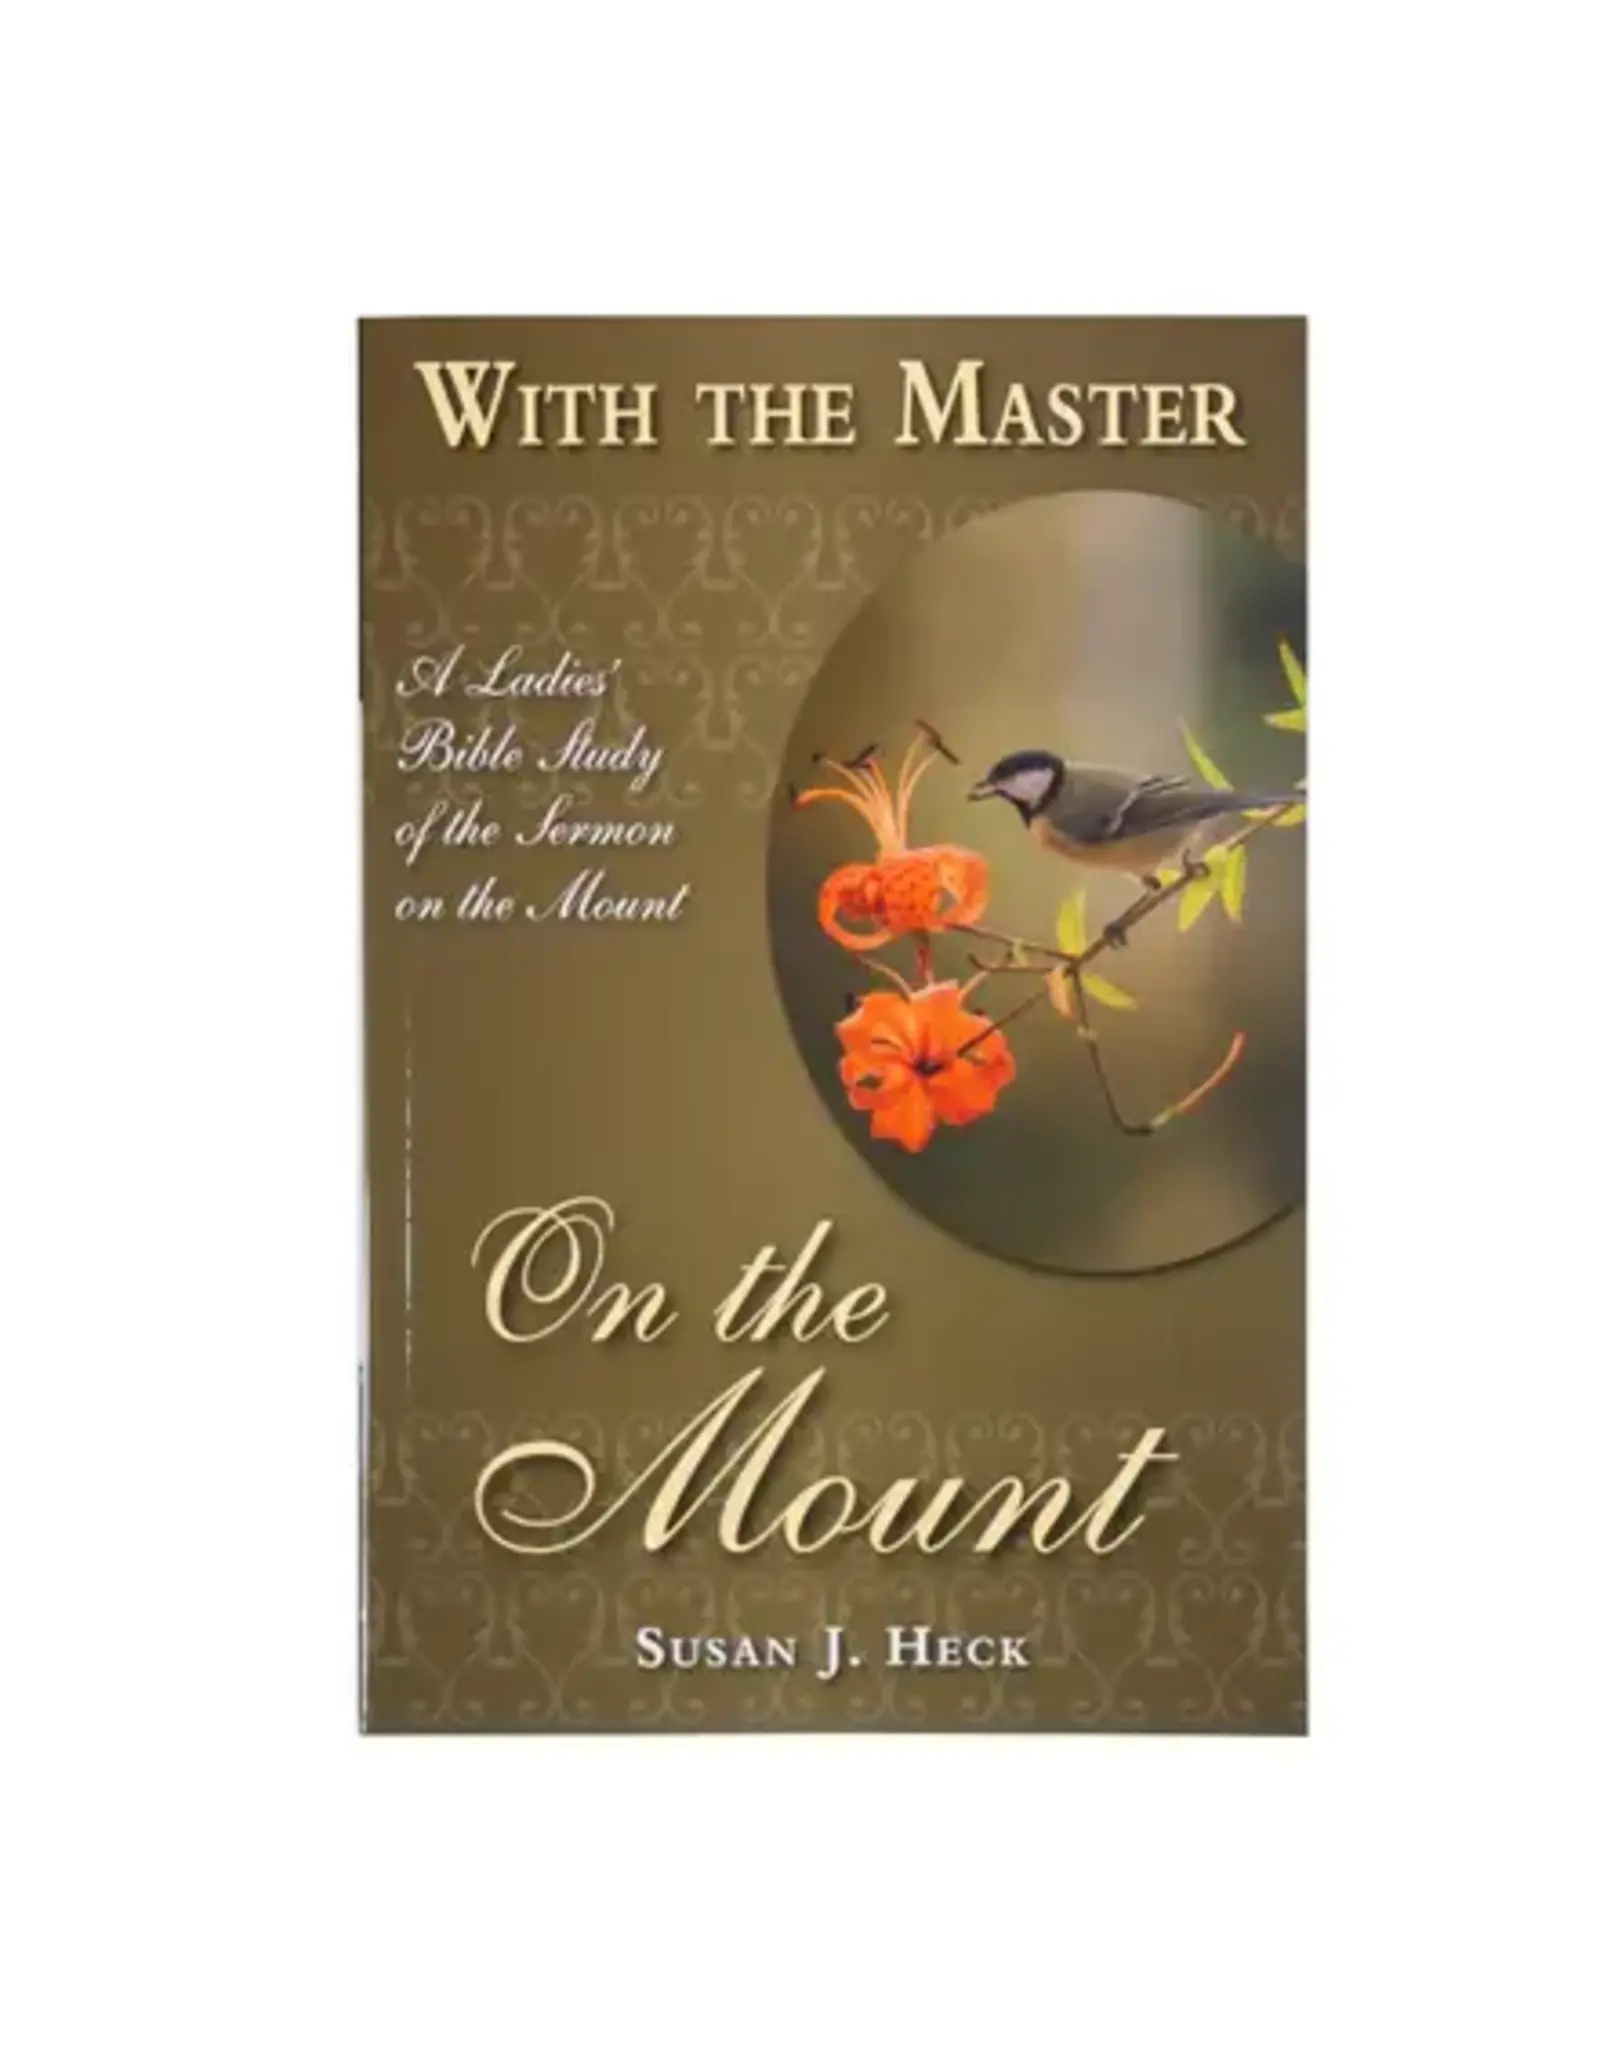 Susan J. Heck With the Master - On the Mount